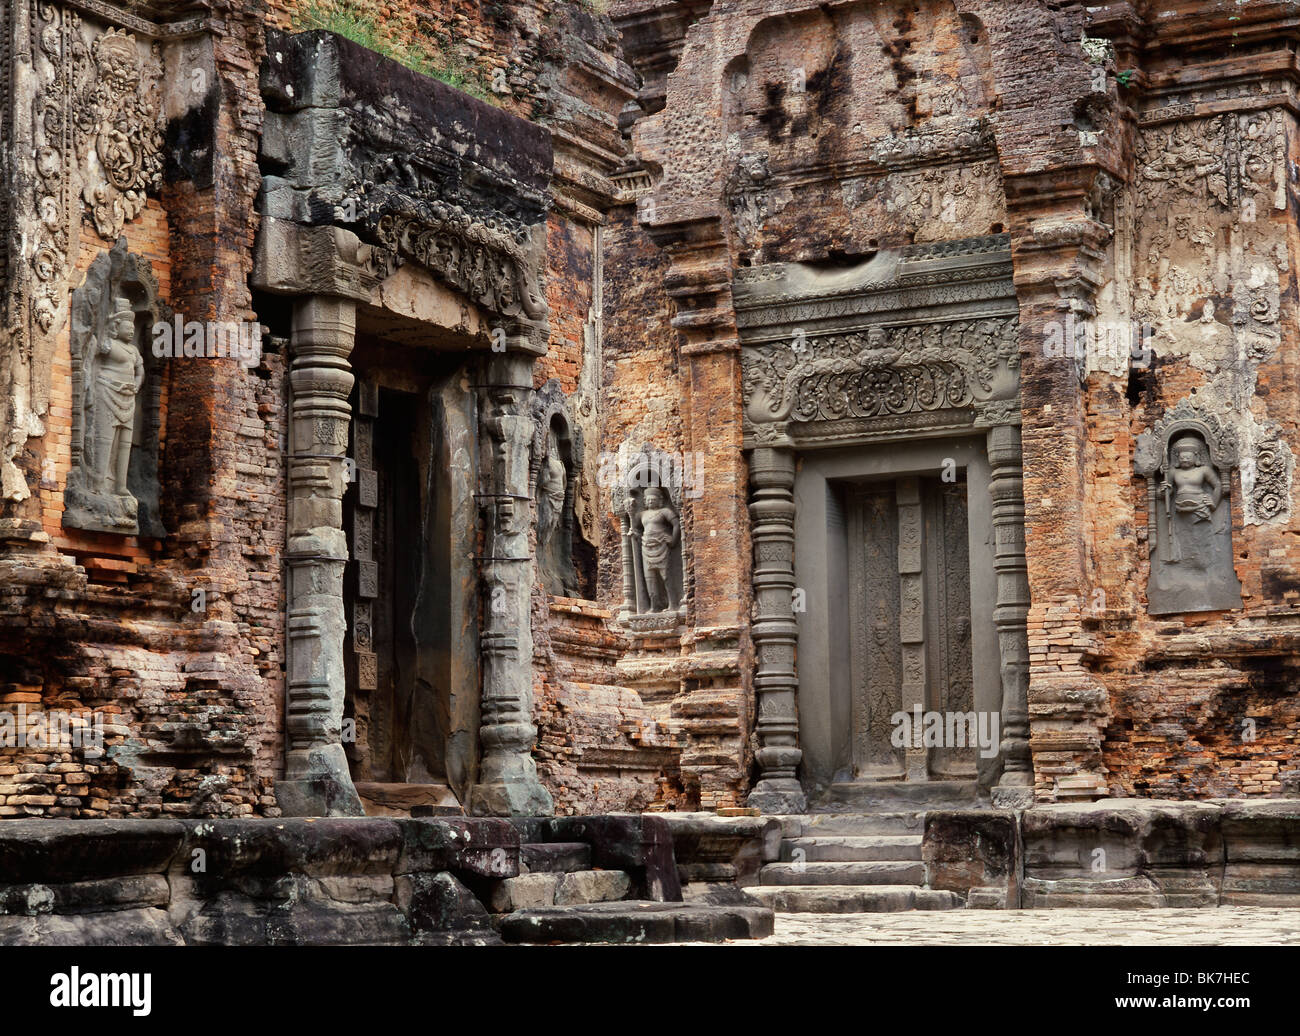 Prah Ko dating from the late 9th century, Roluos, near Siem Reap, Cambodia, Indochina, Southeast Asia, Asia Stock Photo